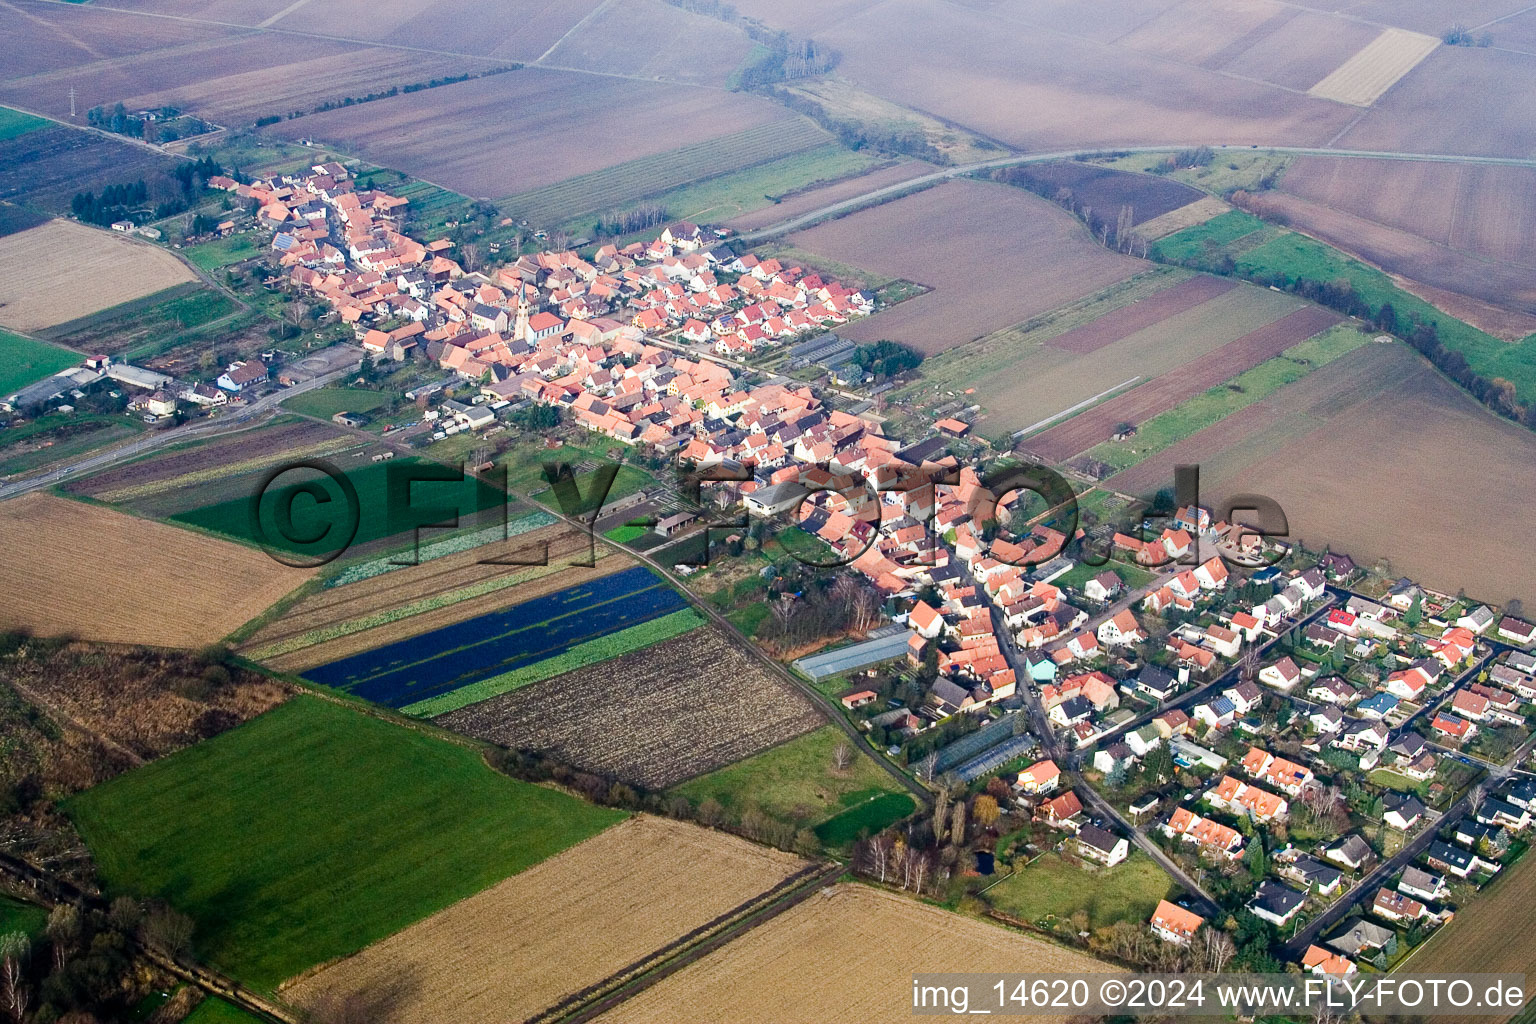 Aerial view of Village - view on the edge of agricultural fields and farmland in the district Gewerbegebiet Horst in Erlenbach bei Kandel in the state Rhineland-Palatinate